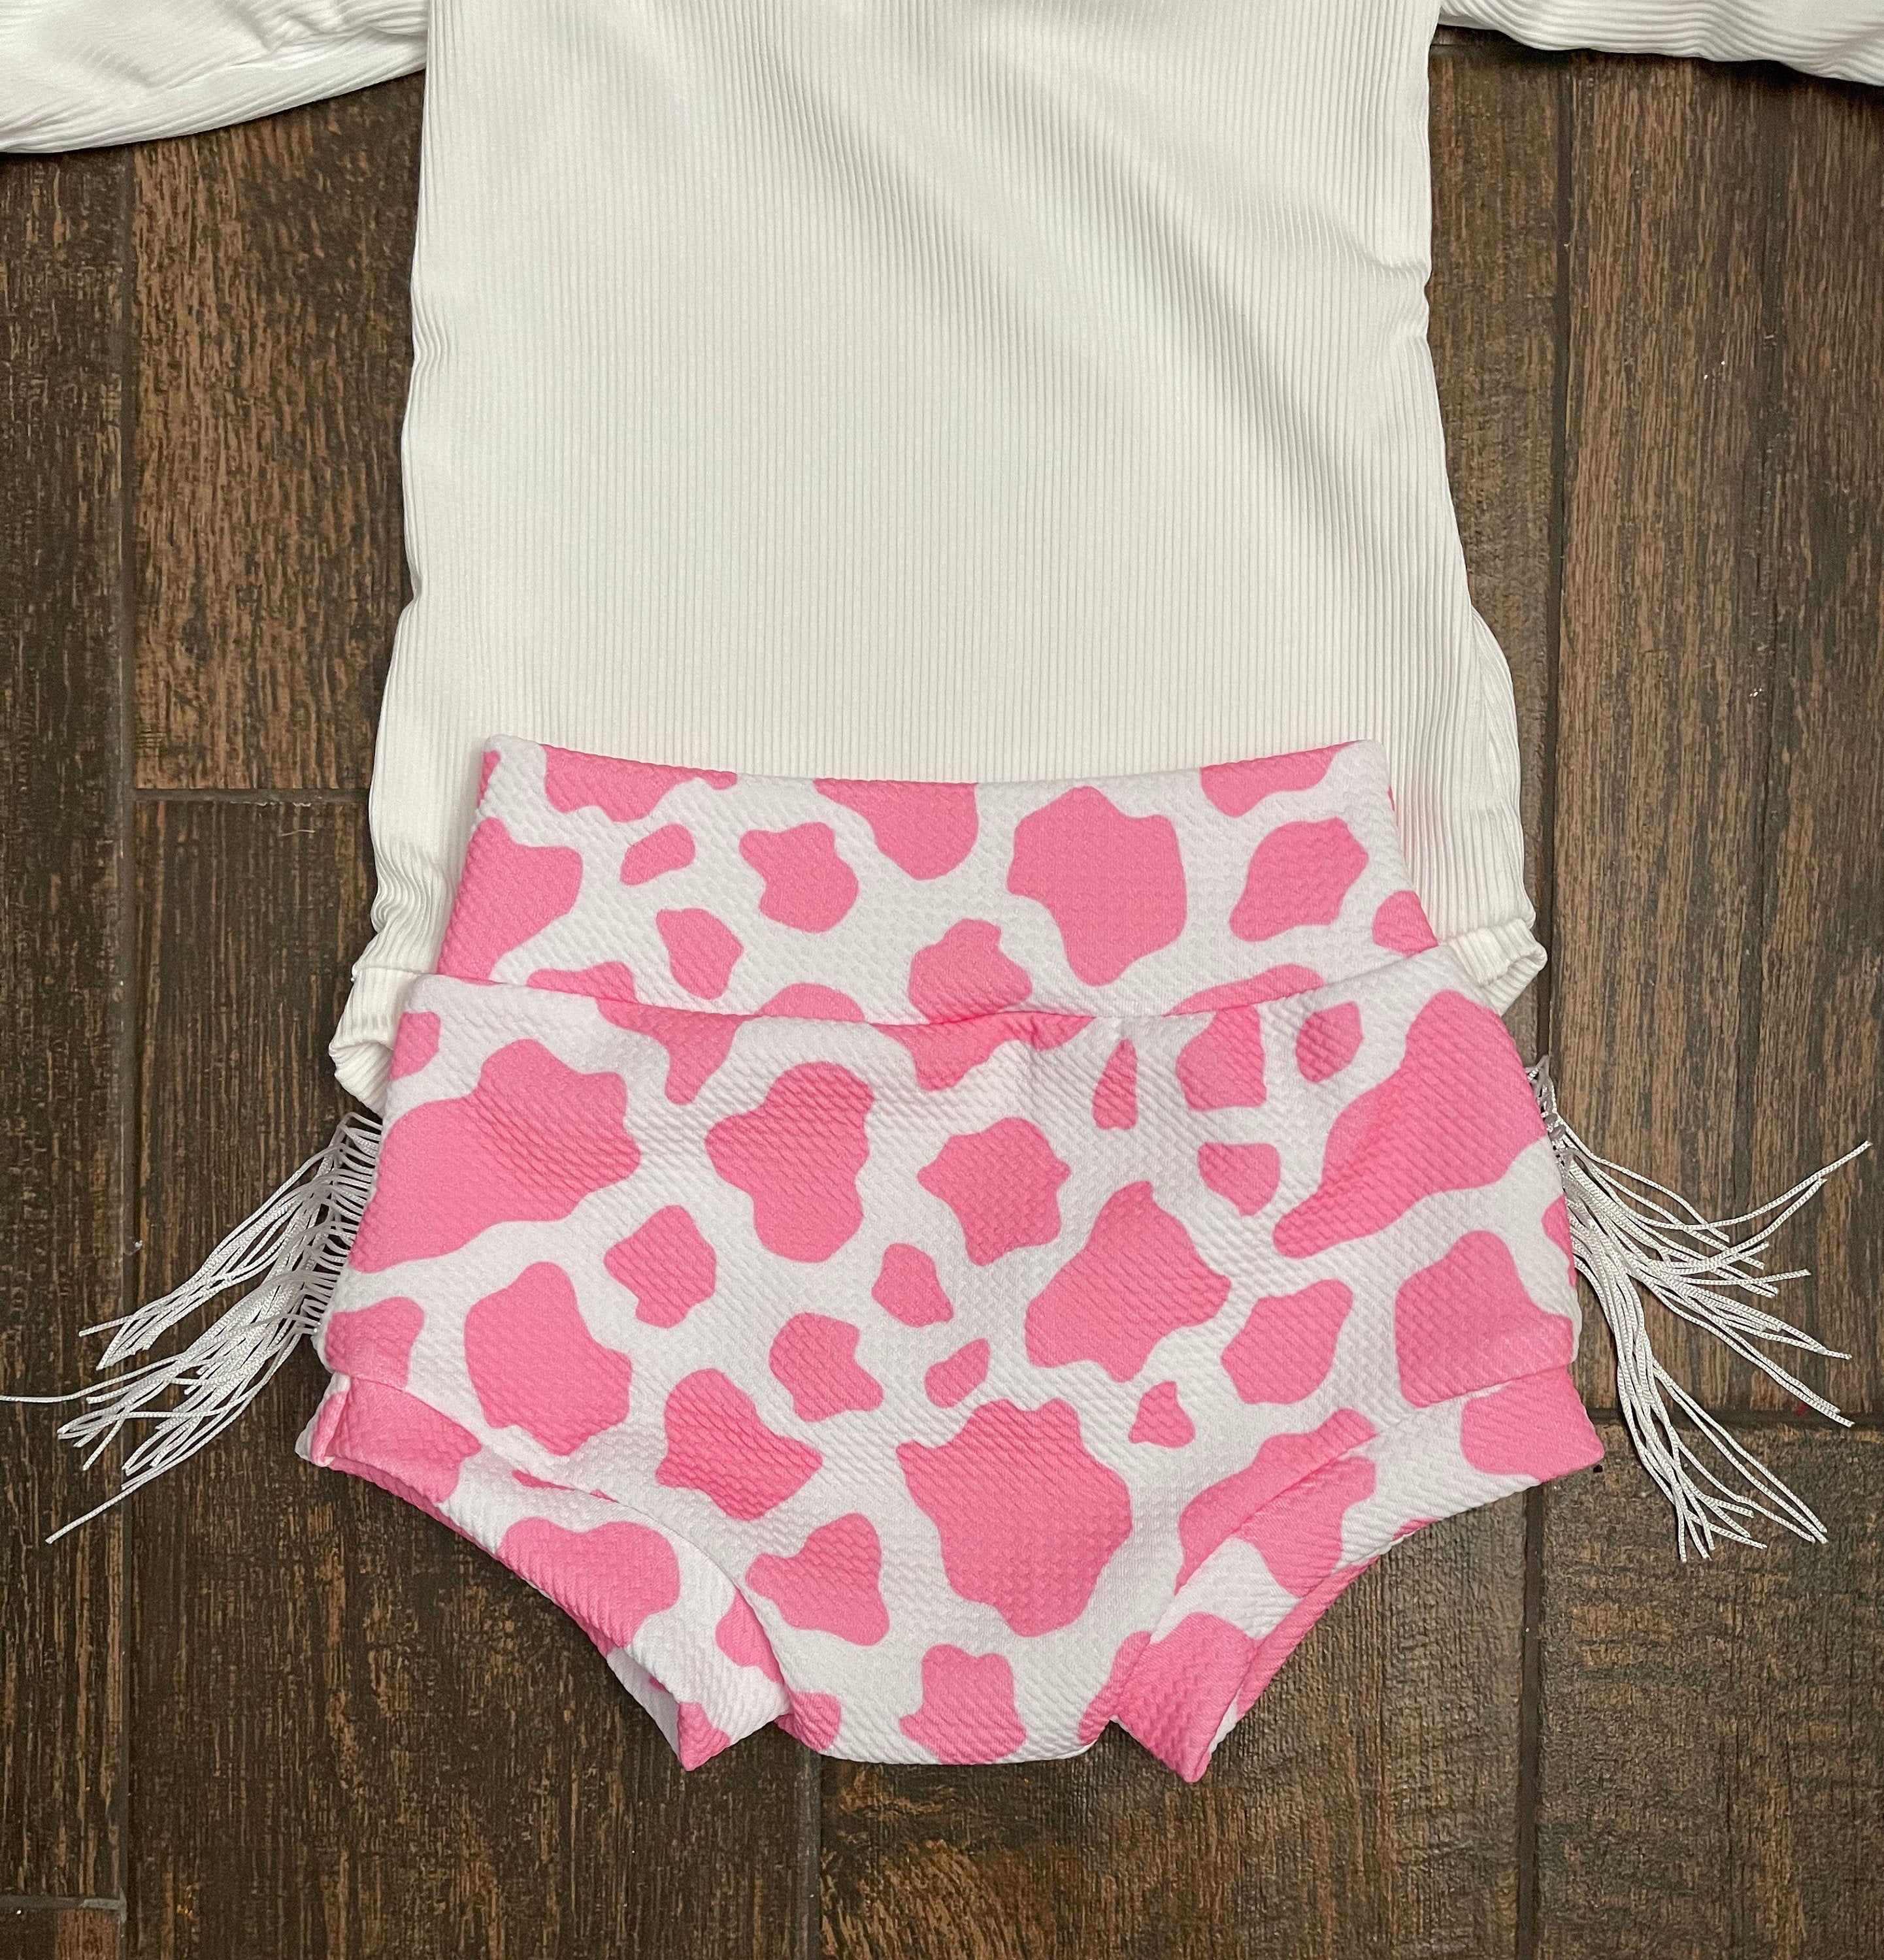 Pink Cow Print  Outfit